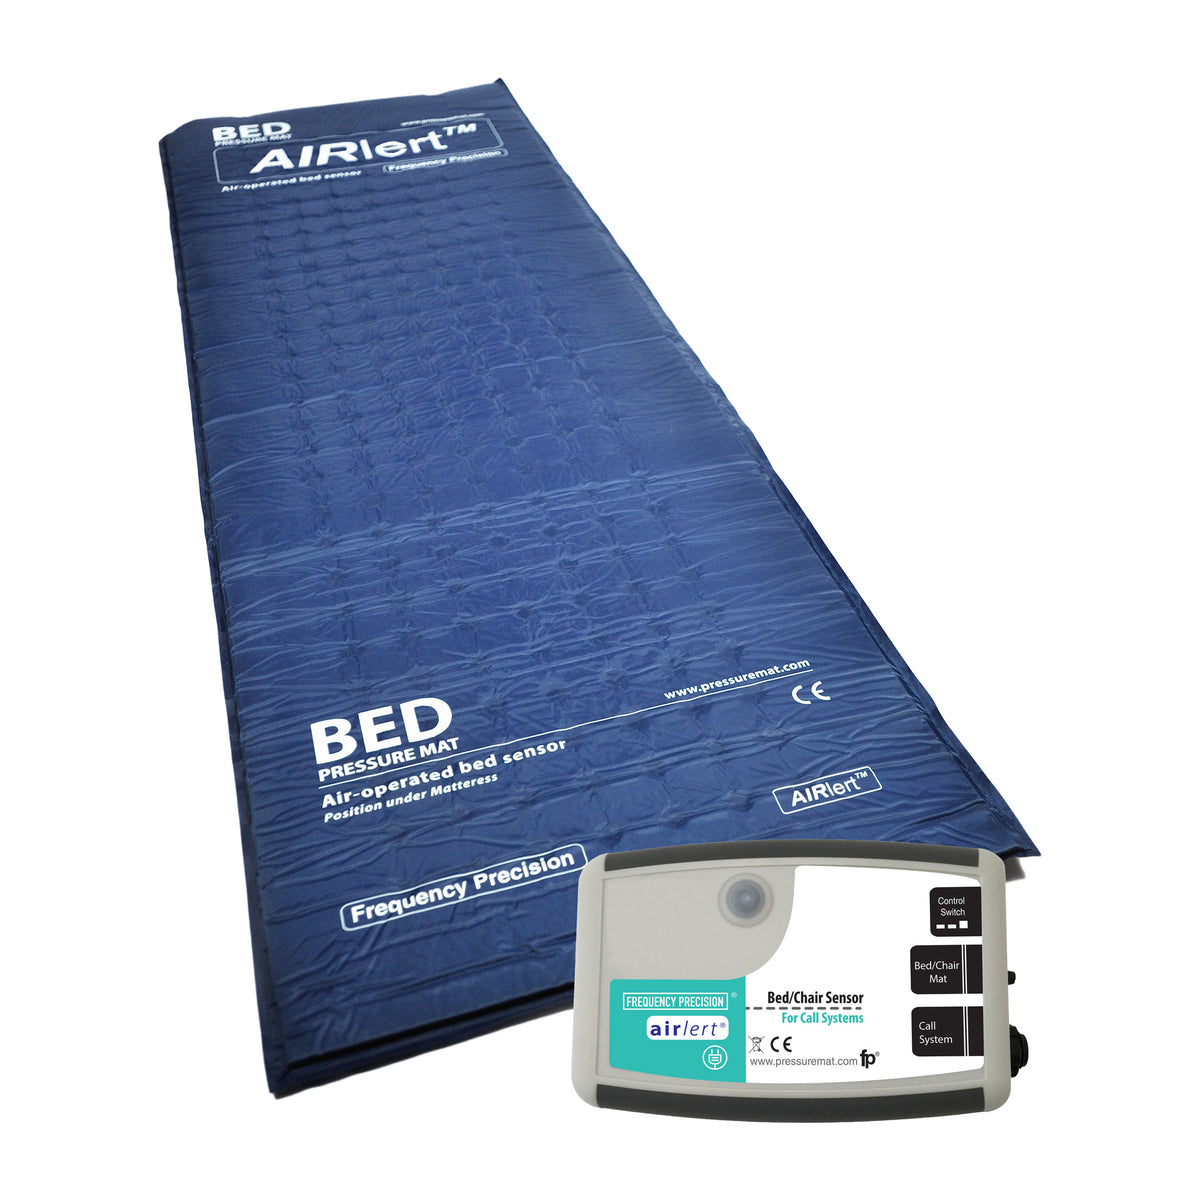 Product image of a Bed Pressure Mat for Nurse Call Systems, featuring a pressure-sensitive mat with a blue cover and a bed sensor pack